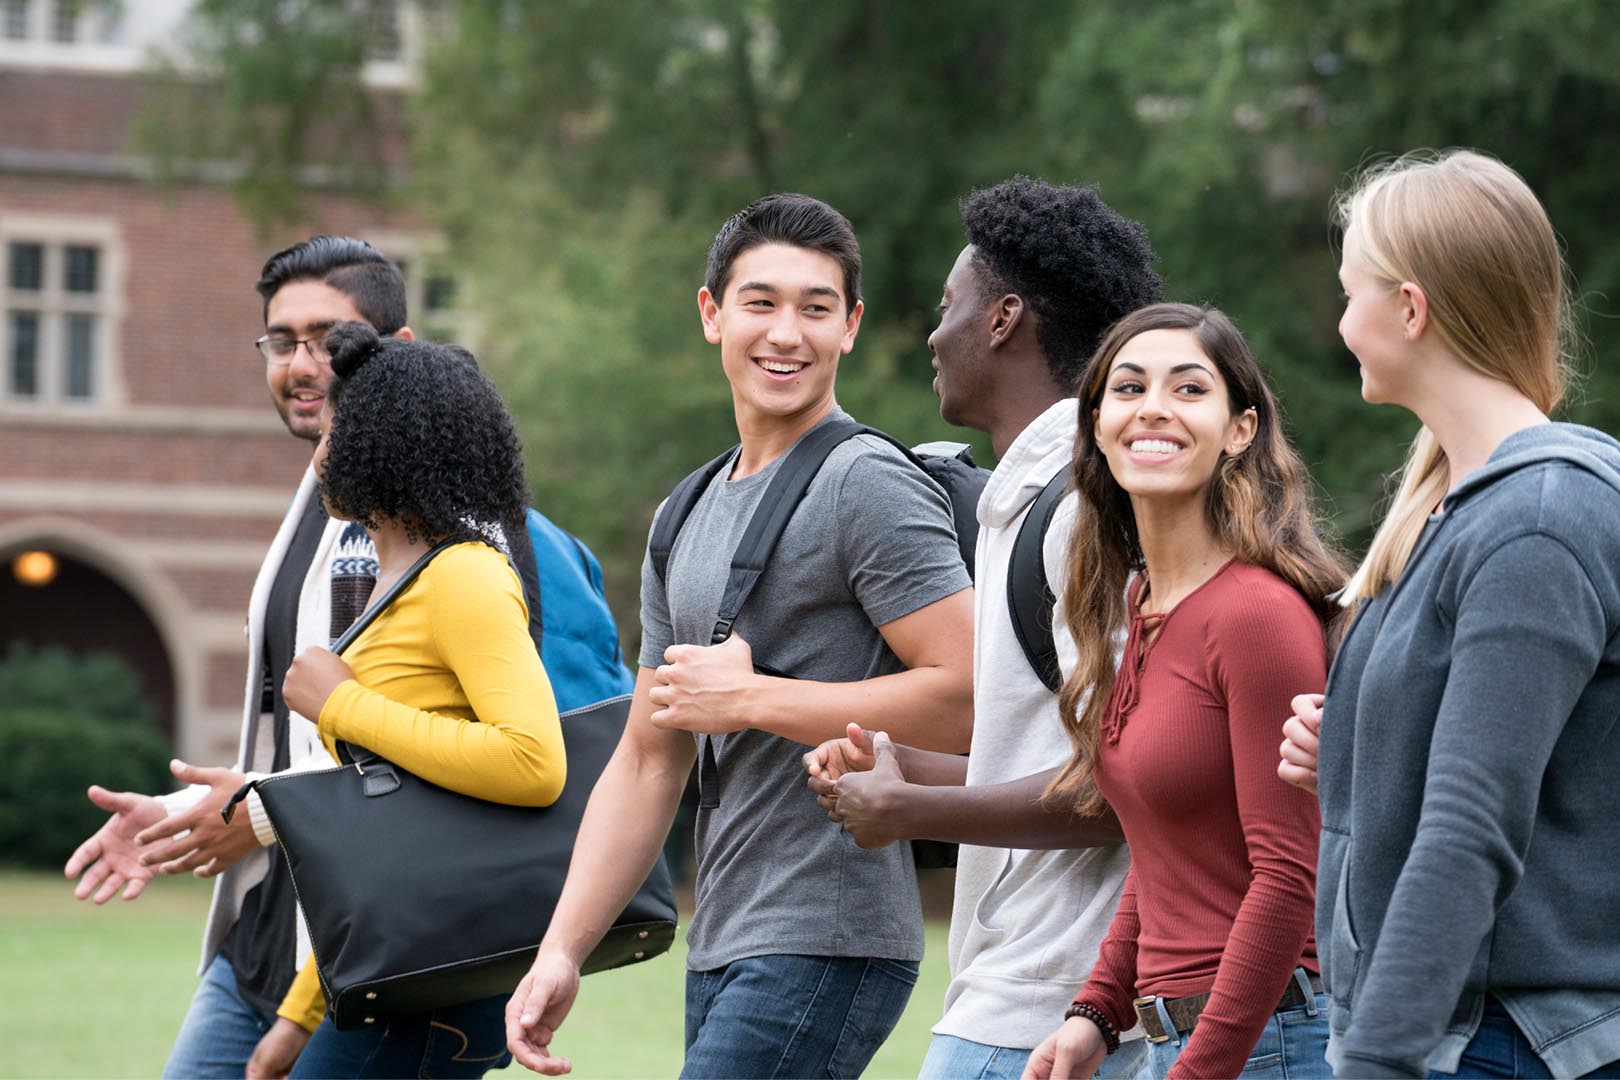 Students walking and smiling on a college campus